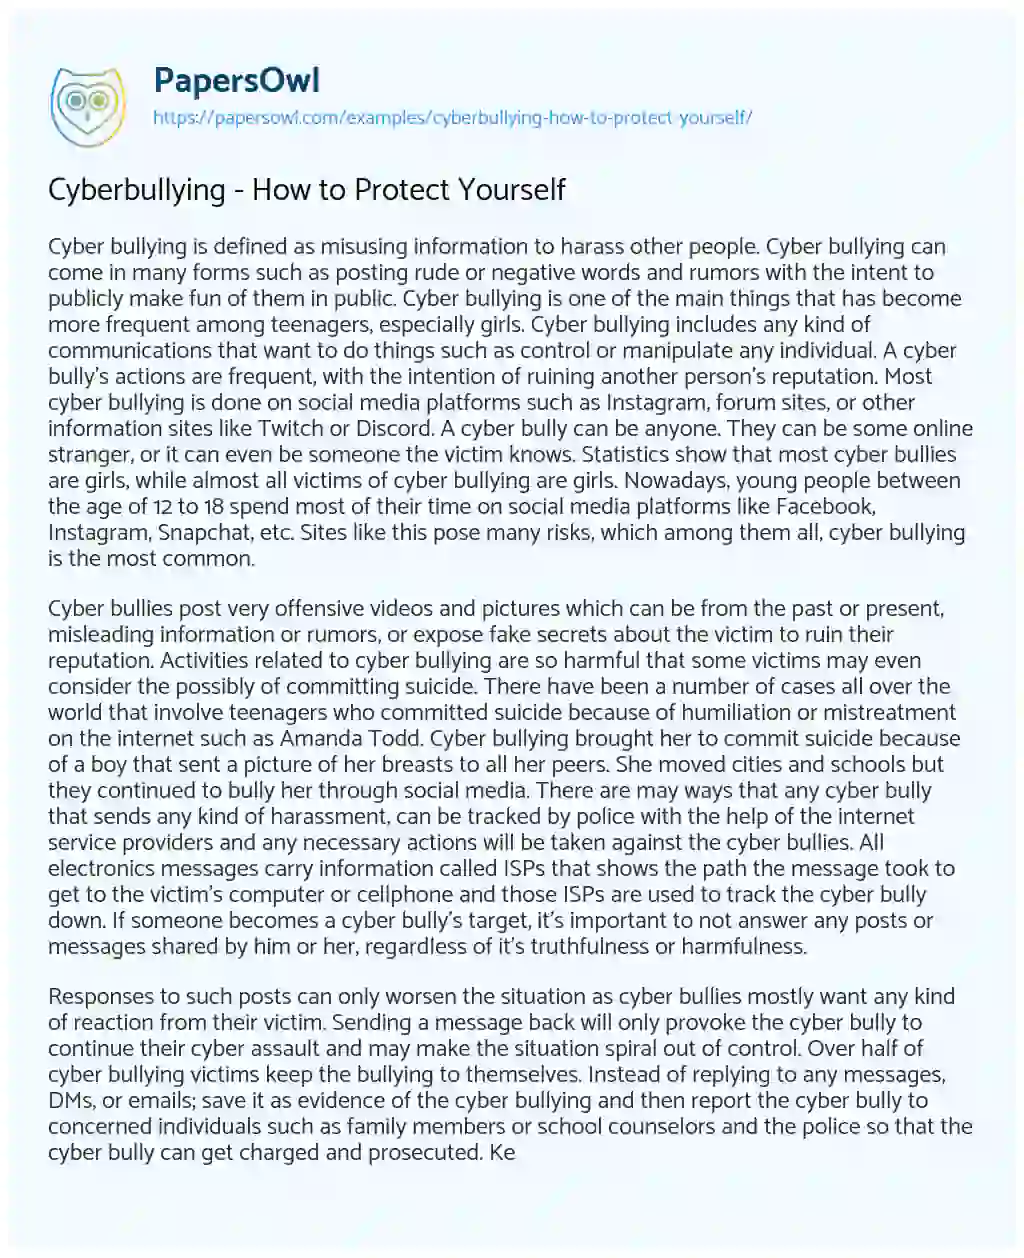 Cyberbullying – how to Protect yourself essay